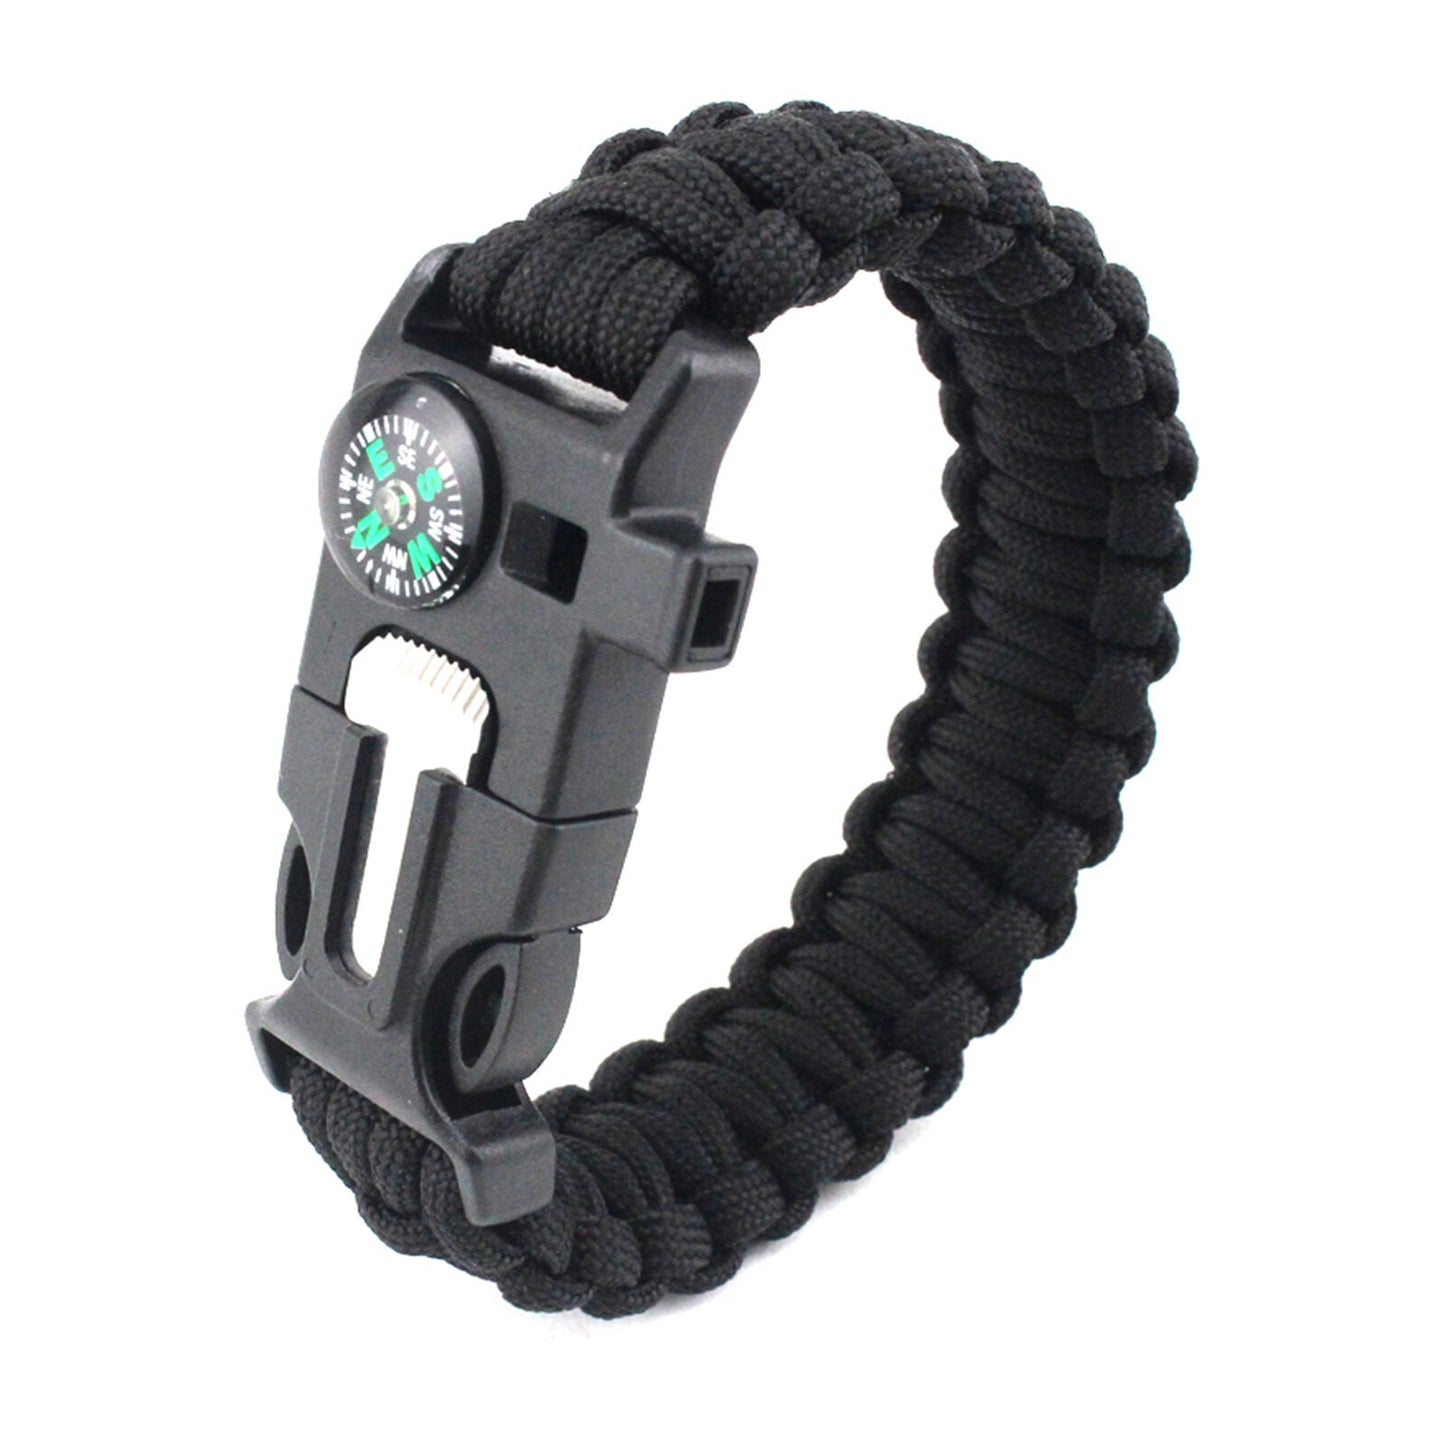 Survival Bracelet with Compass, whistle and fire starter